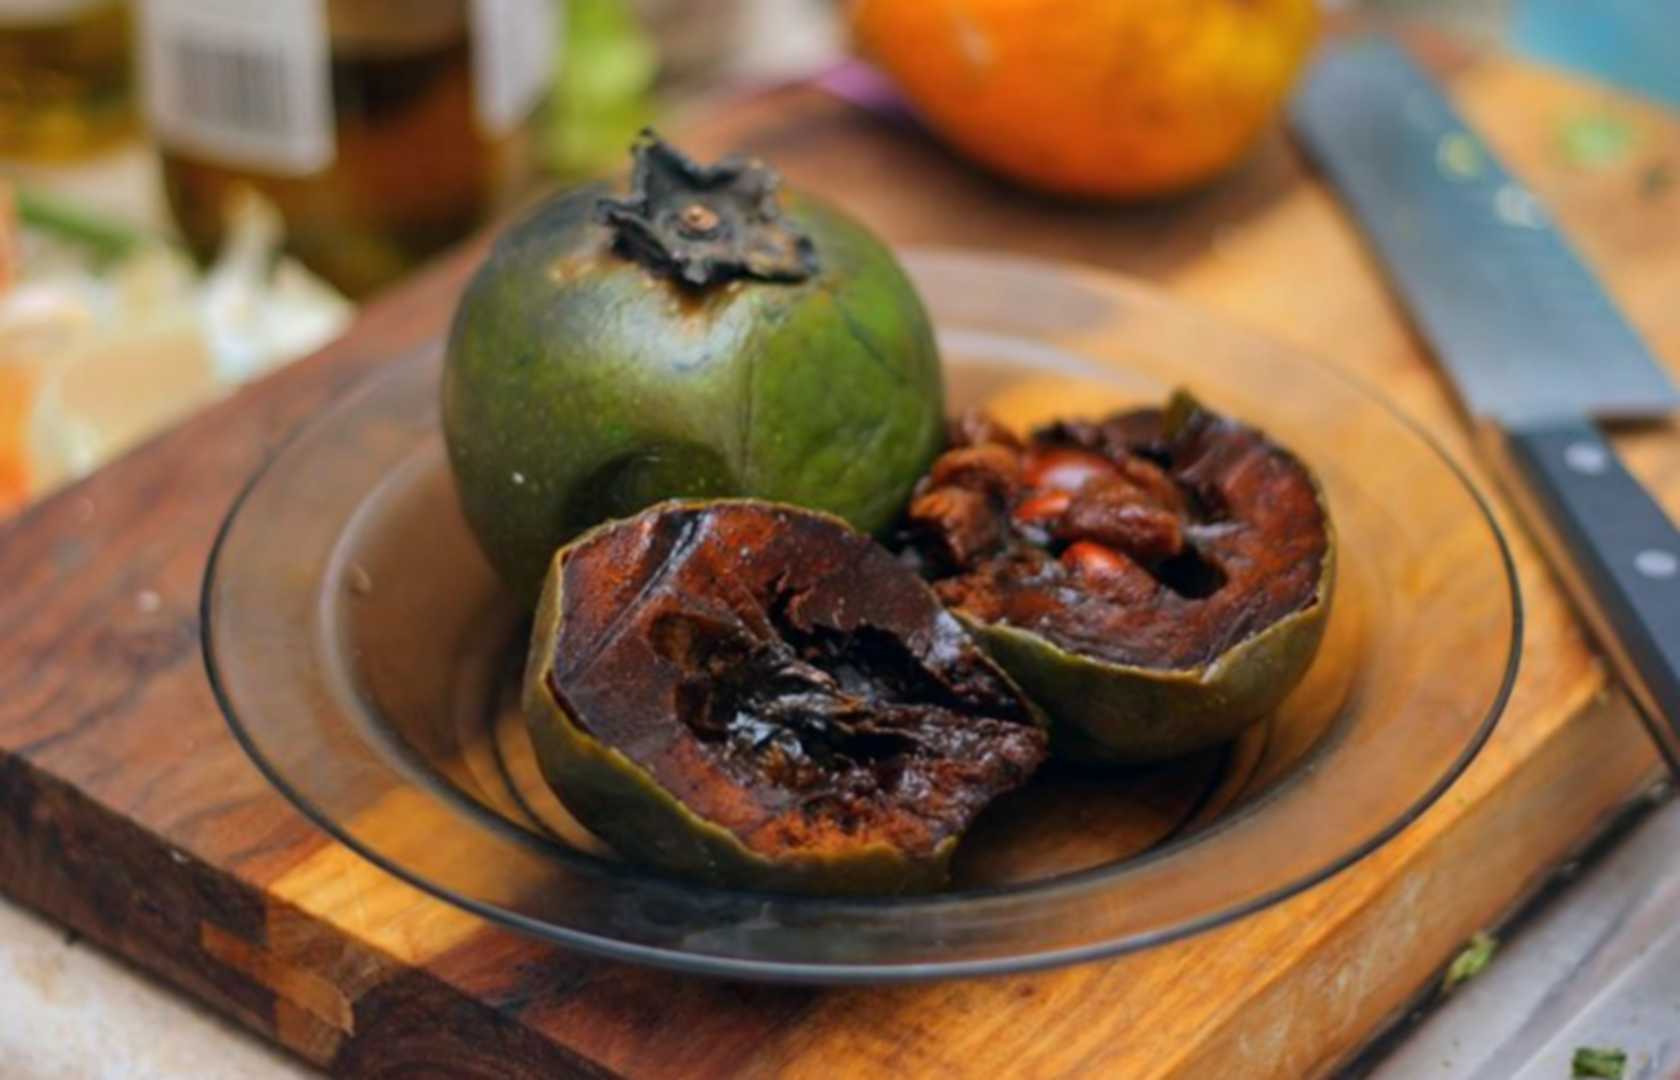 Diospyros digyna (Black Sapote, Chocolate Persimmon